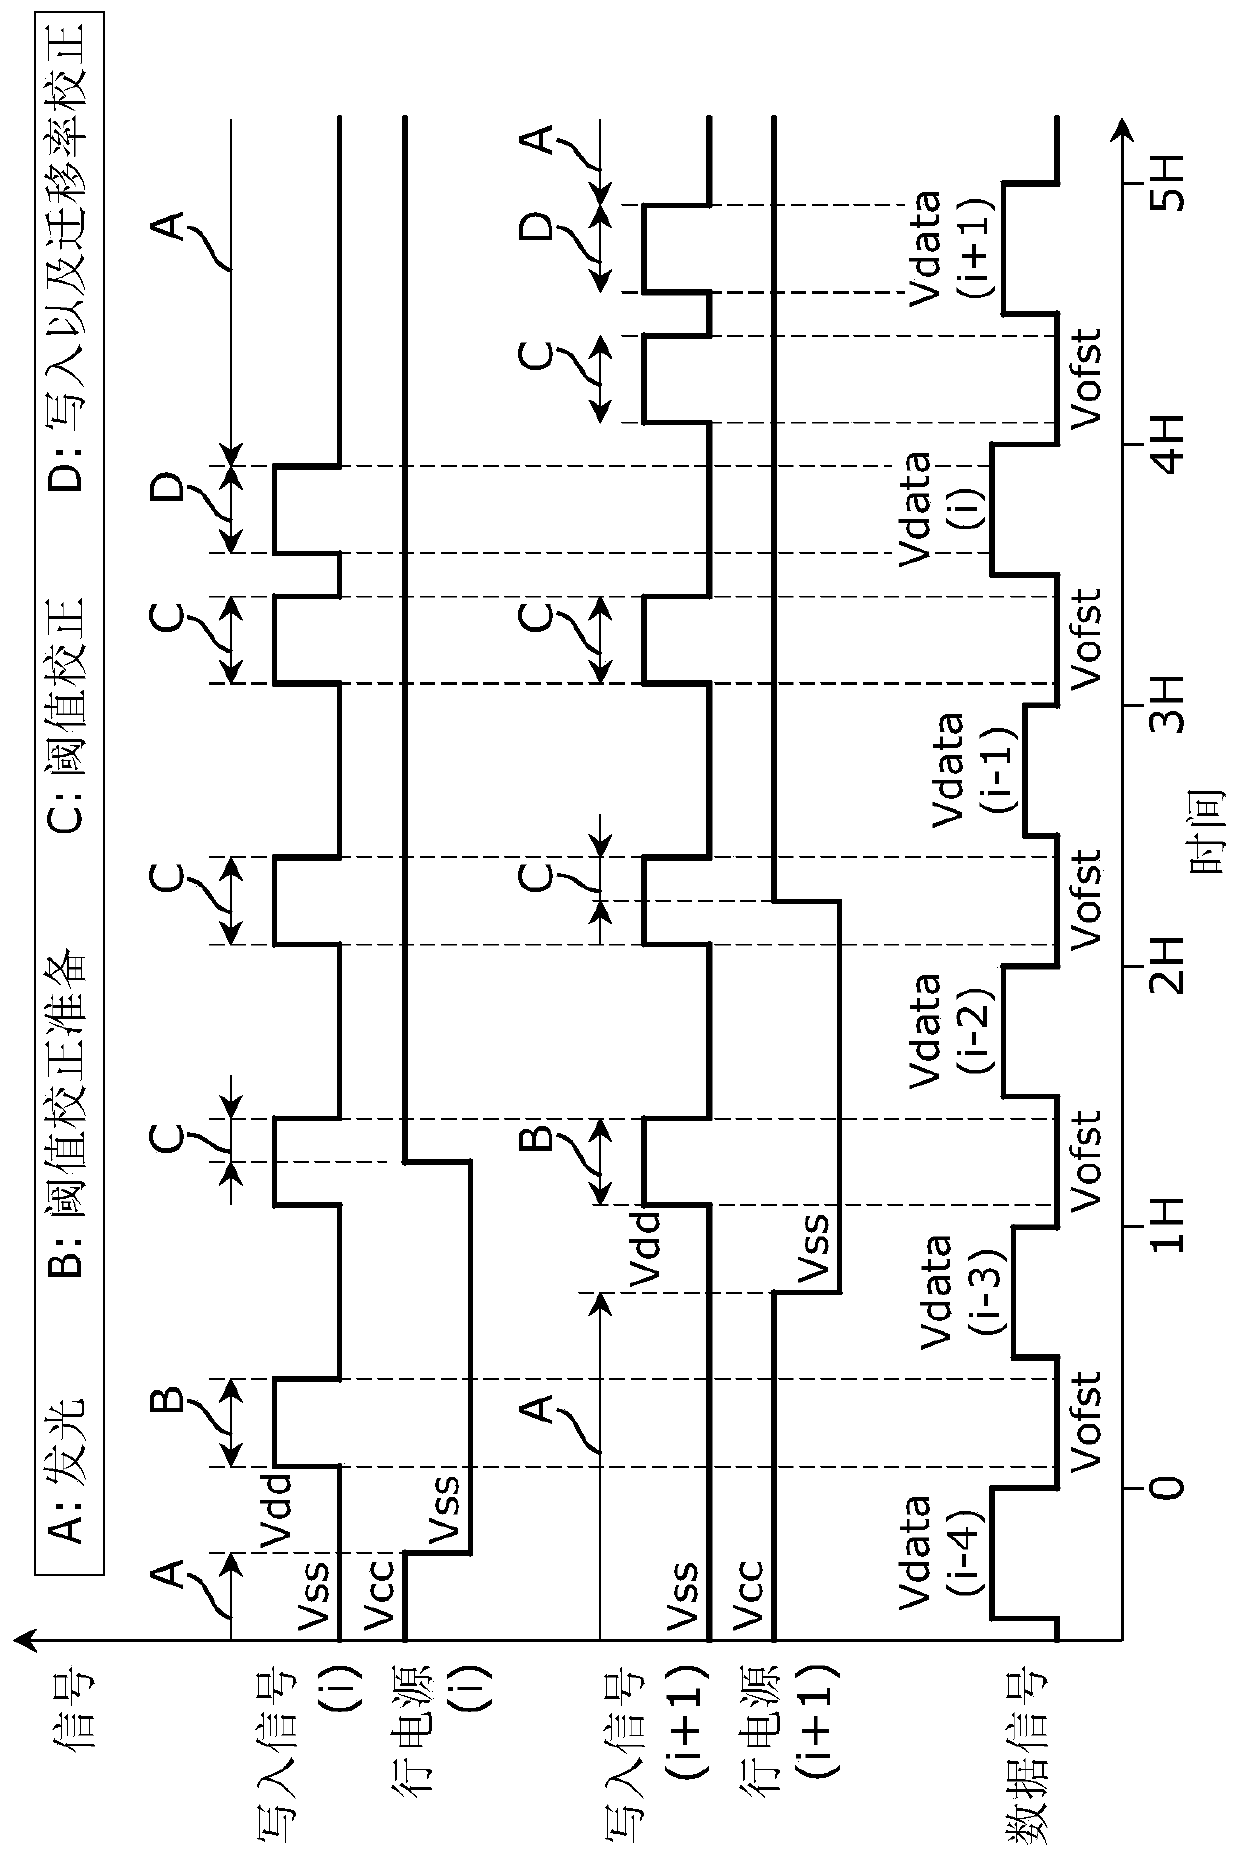 Transfer circuit, shift register, gate driver, display panel, and flexible substrate